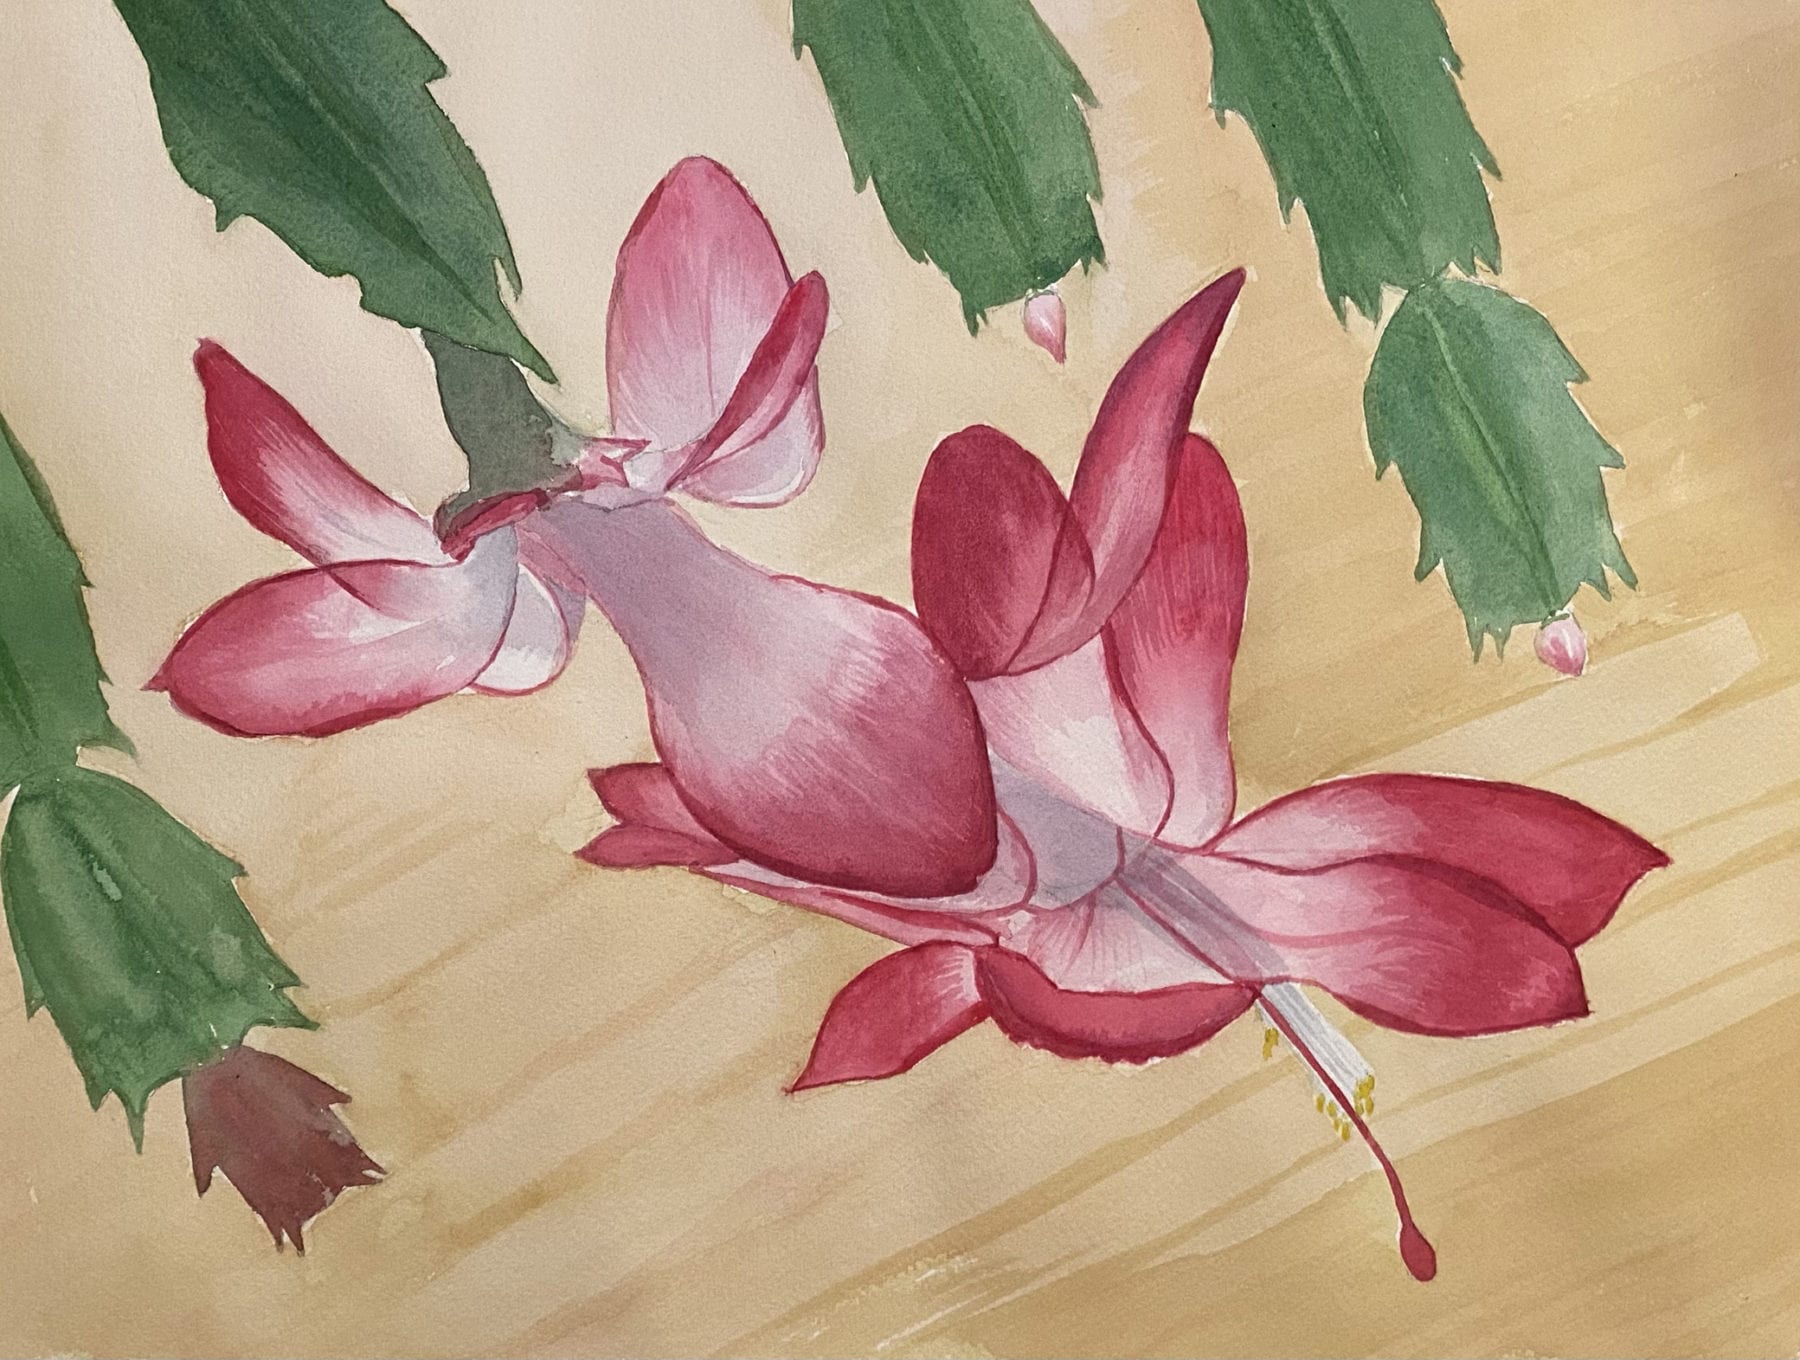 Margaret Simpson, Christmas Cactus Blooms, watercolor, 16 x 12 inches